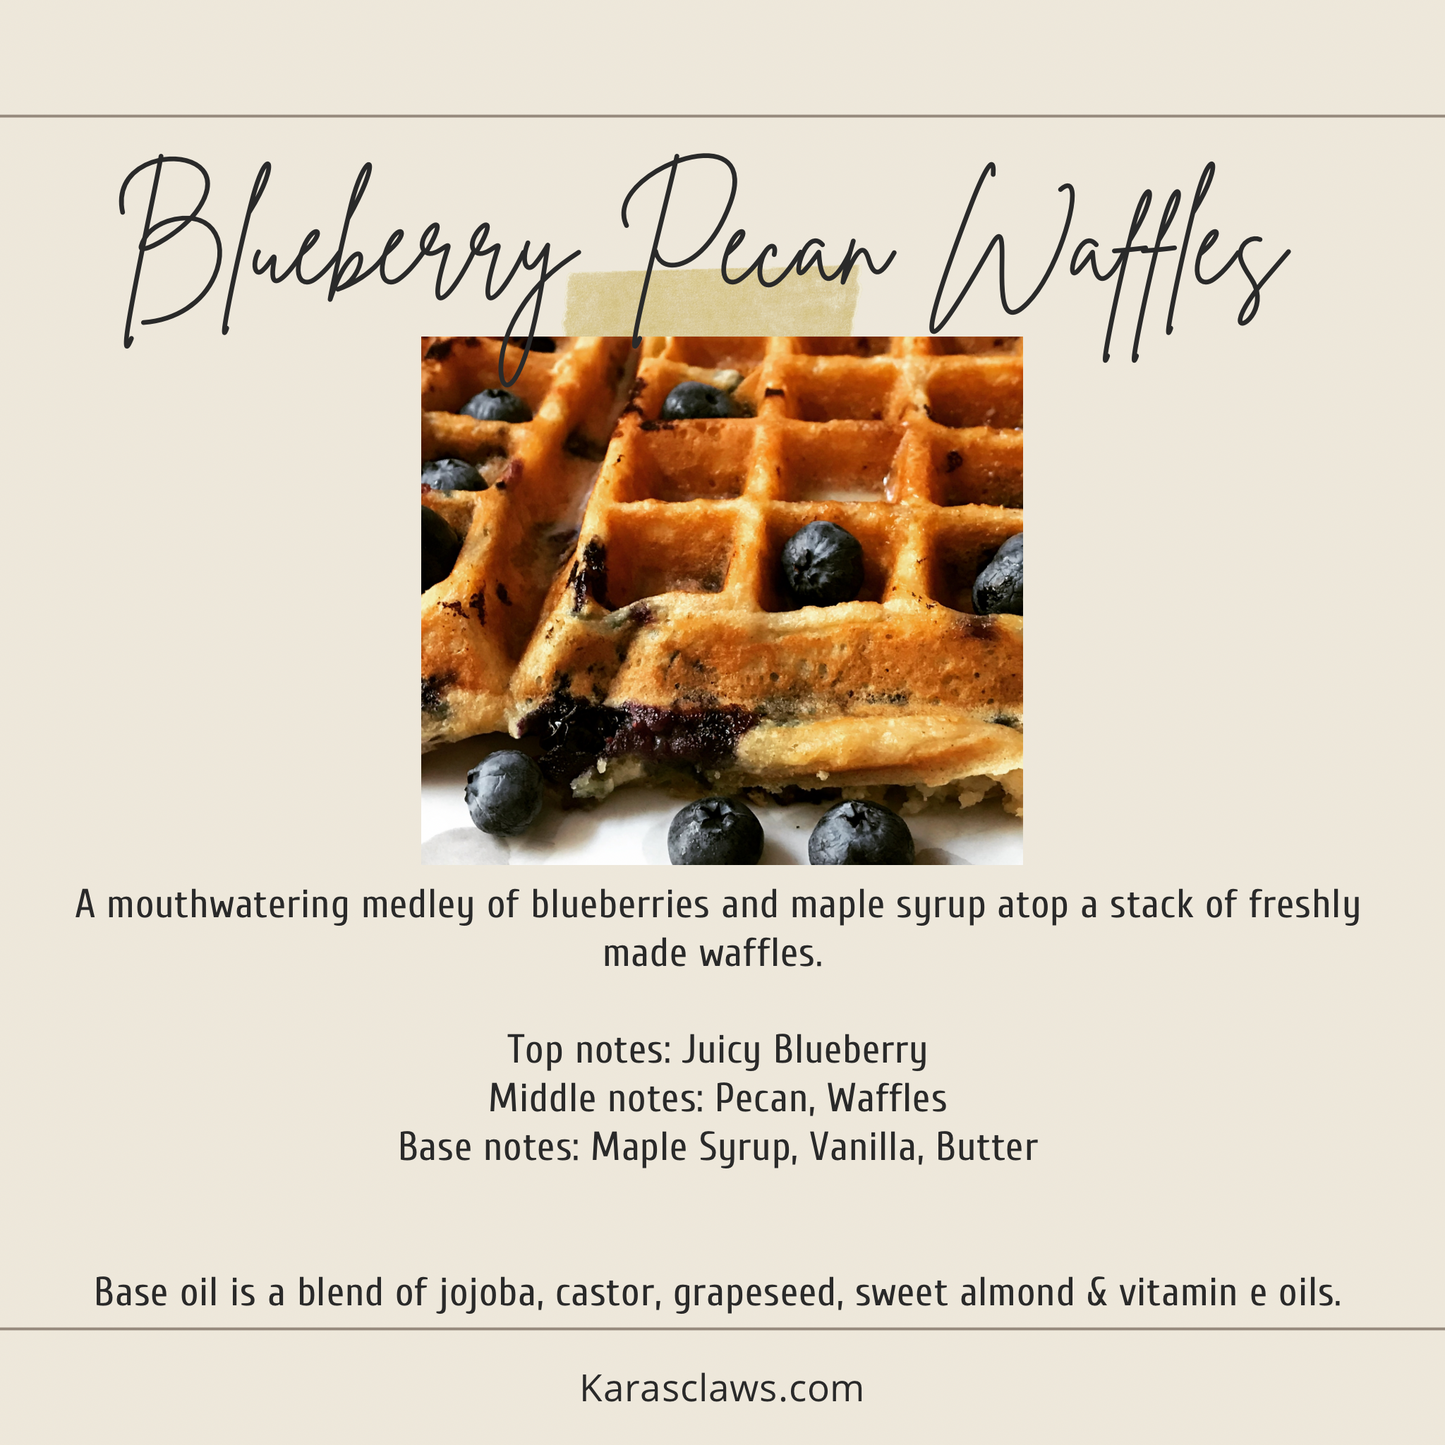 Blueberry Pecan Waffles Cuticle Oil